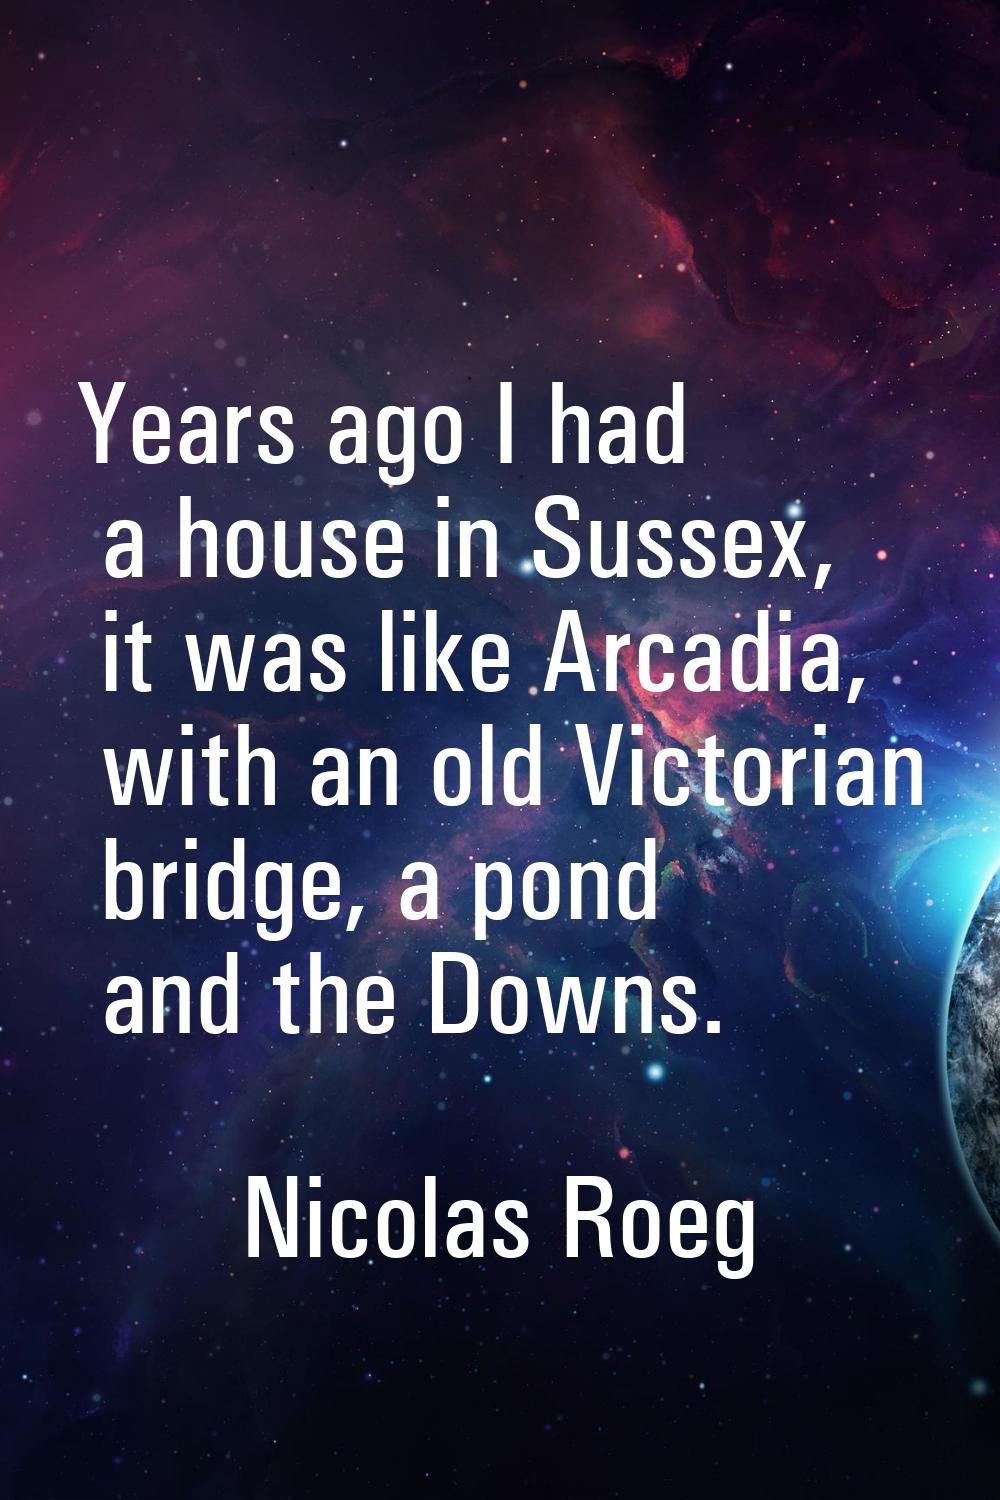 Years ago I had a house in Sussex, it was like Arcadia, with an old Victorian bridge, a pond and th